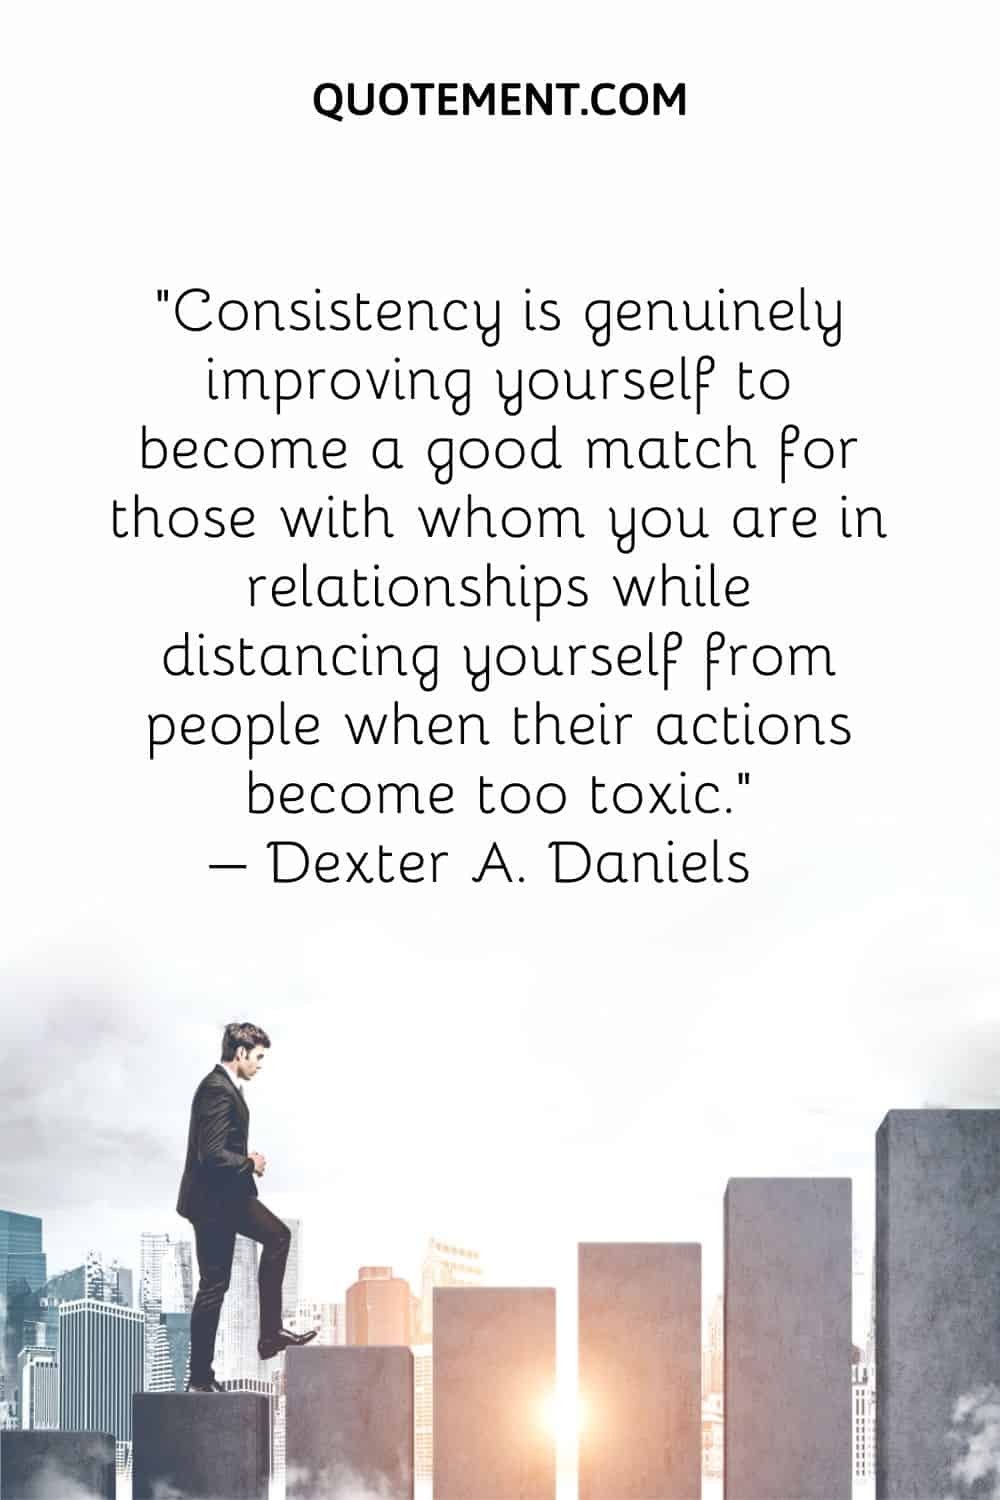 Consistency is genuinely improving yourself to become a good match for those with whom you are in relationships